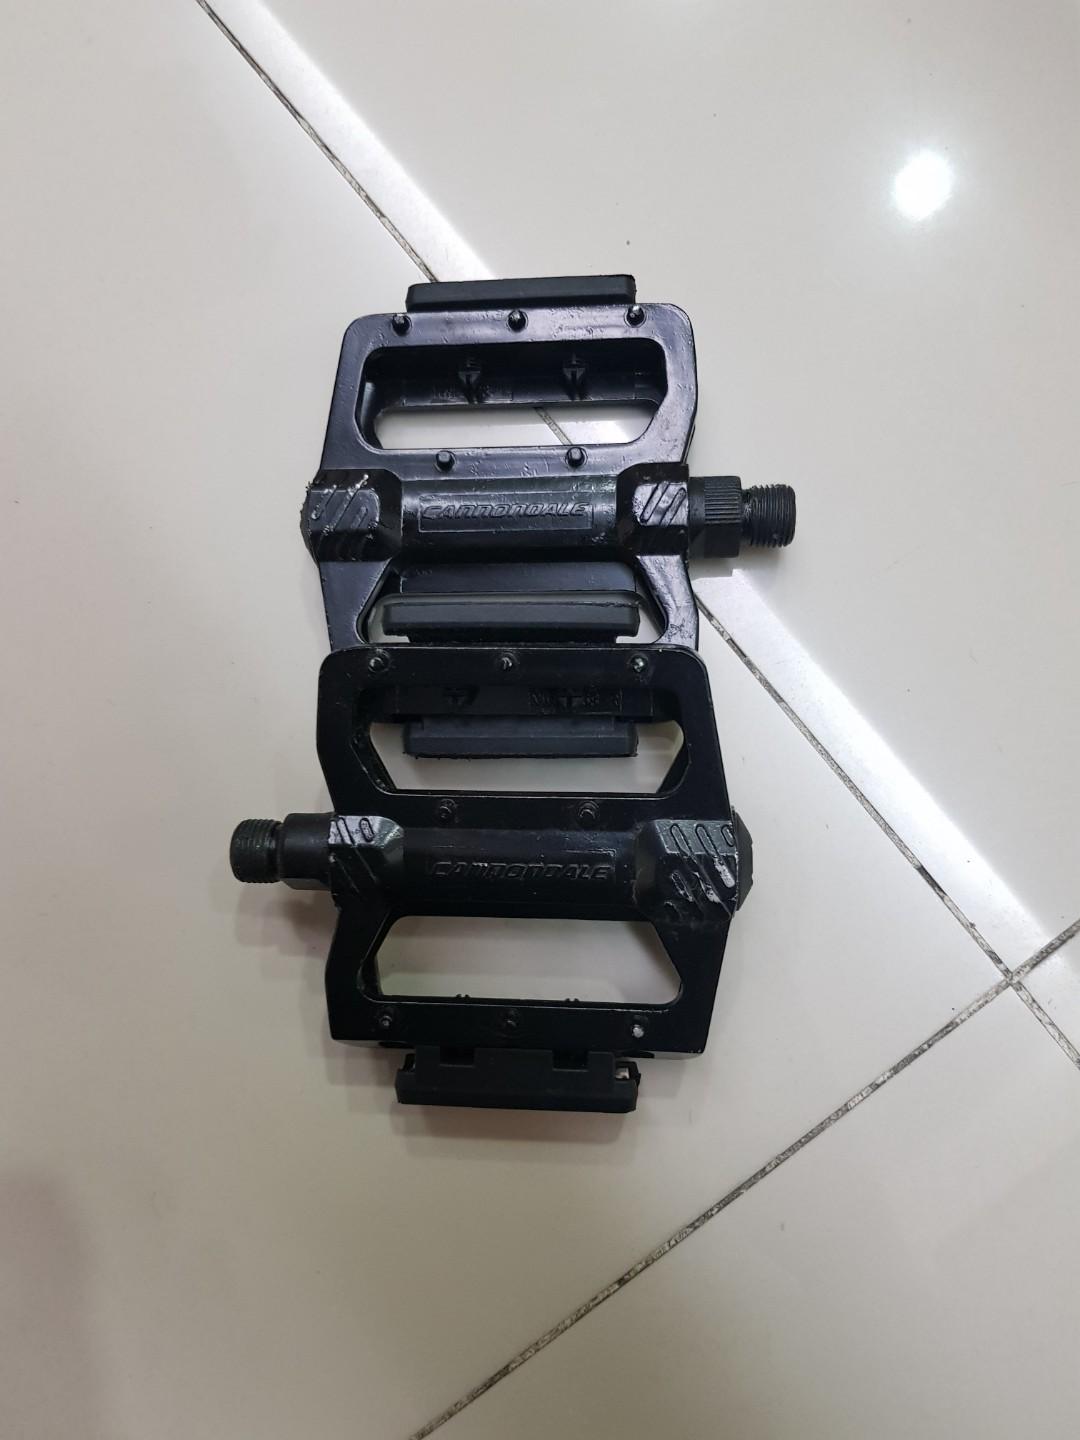 cannondale pedals